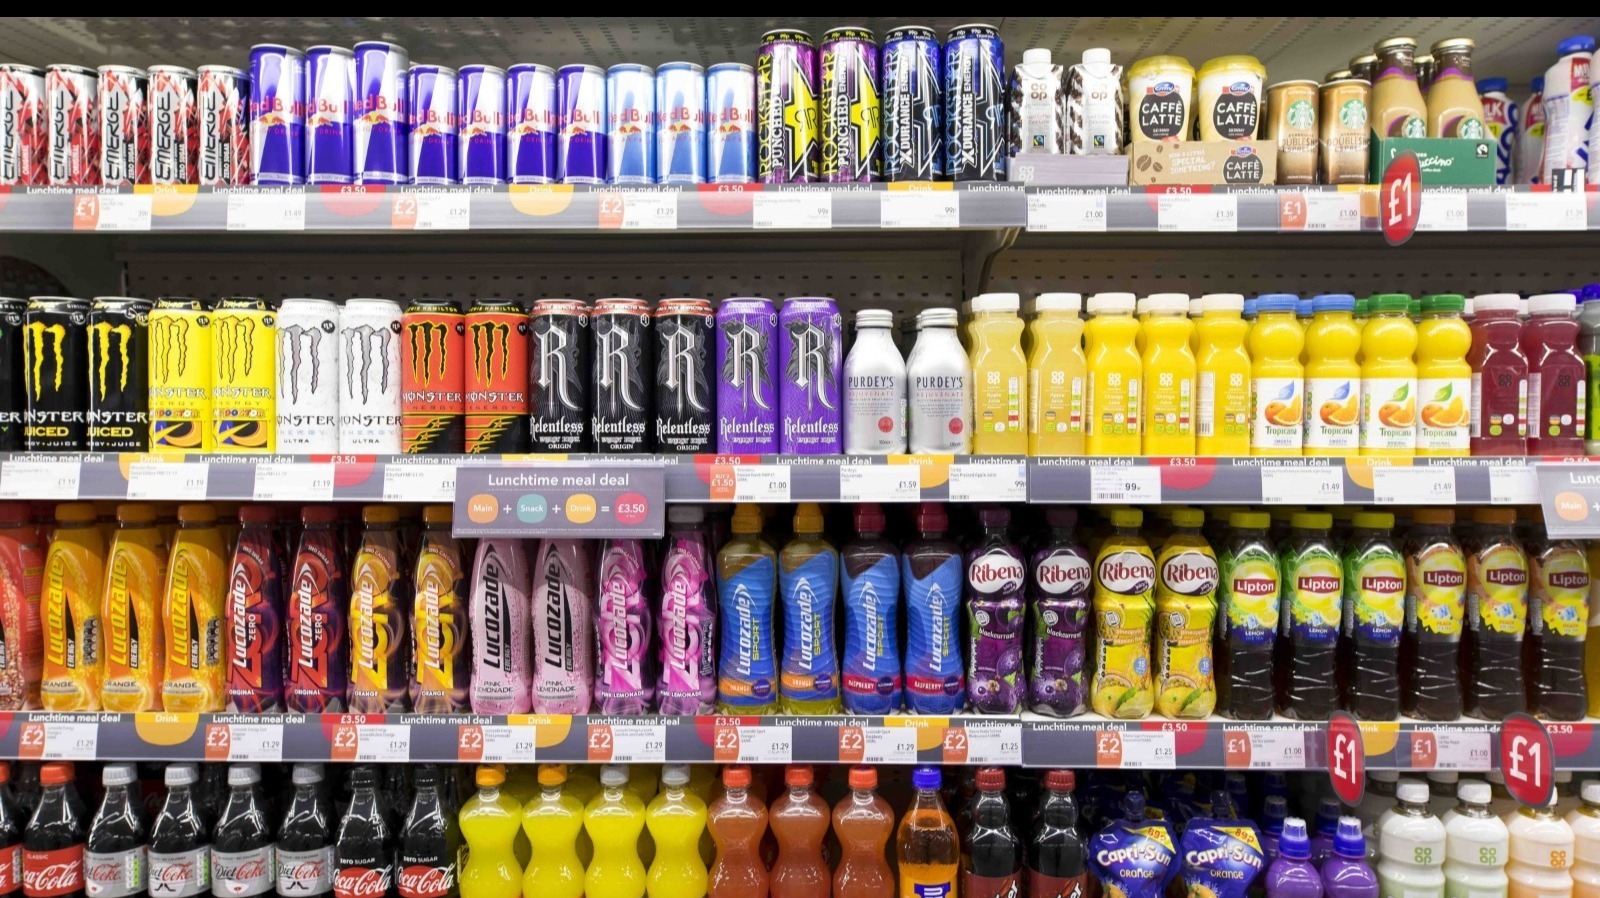 https://www.tastingtable.com/img/gallery/healthy-energy-drinks-you-can-find-in-any-grocery-store/l-intro-1645041534.jpg